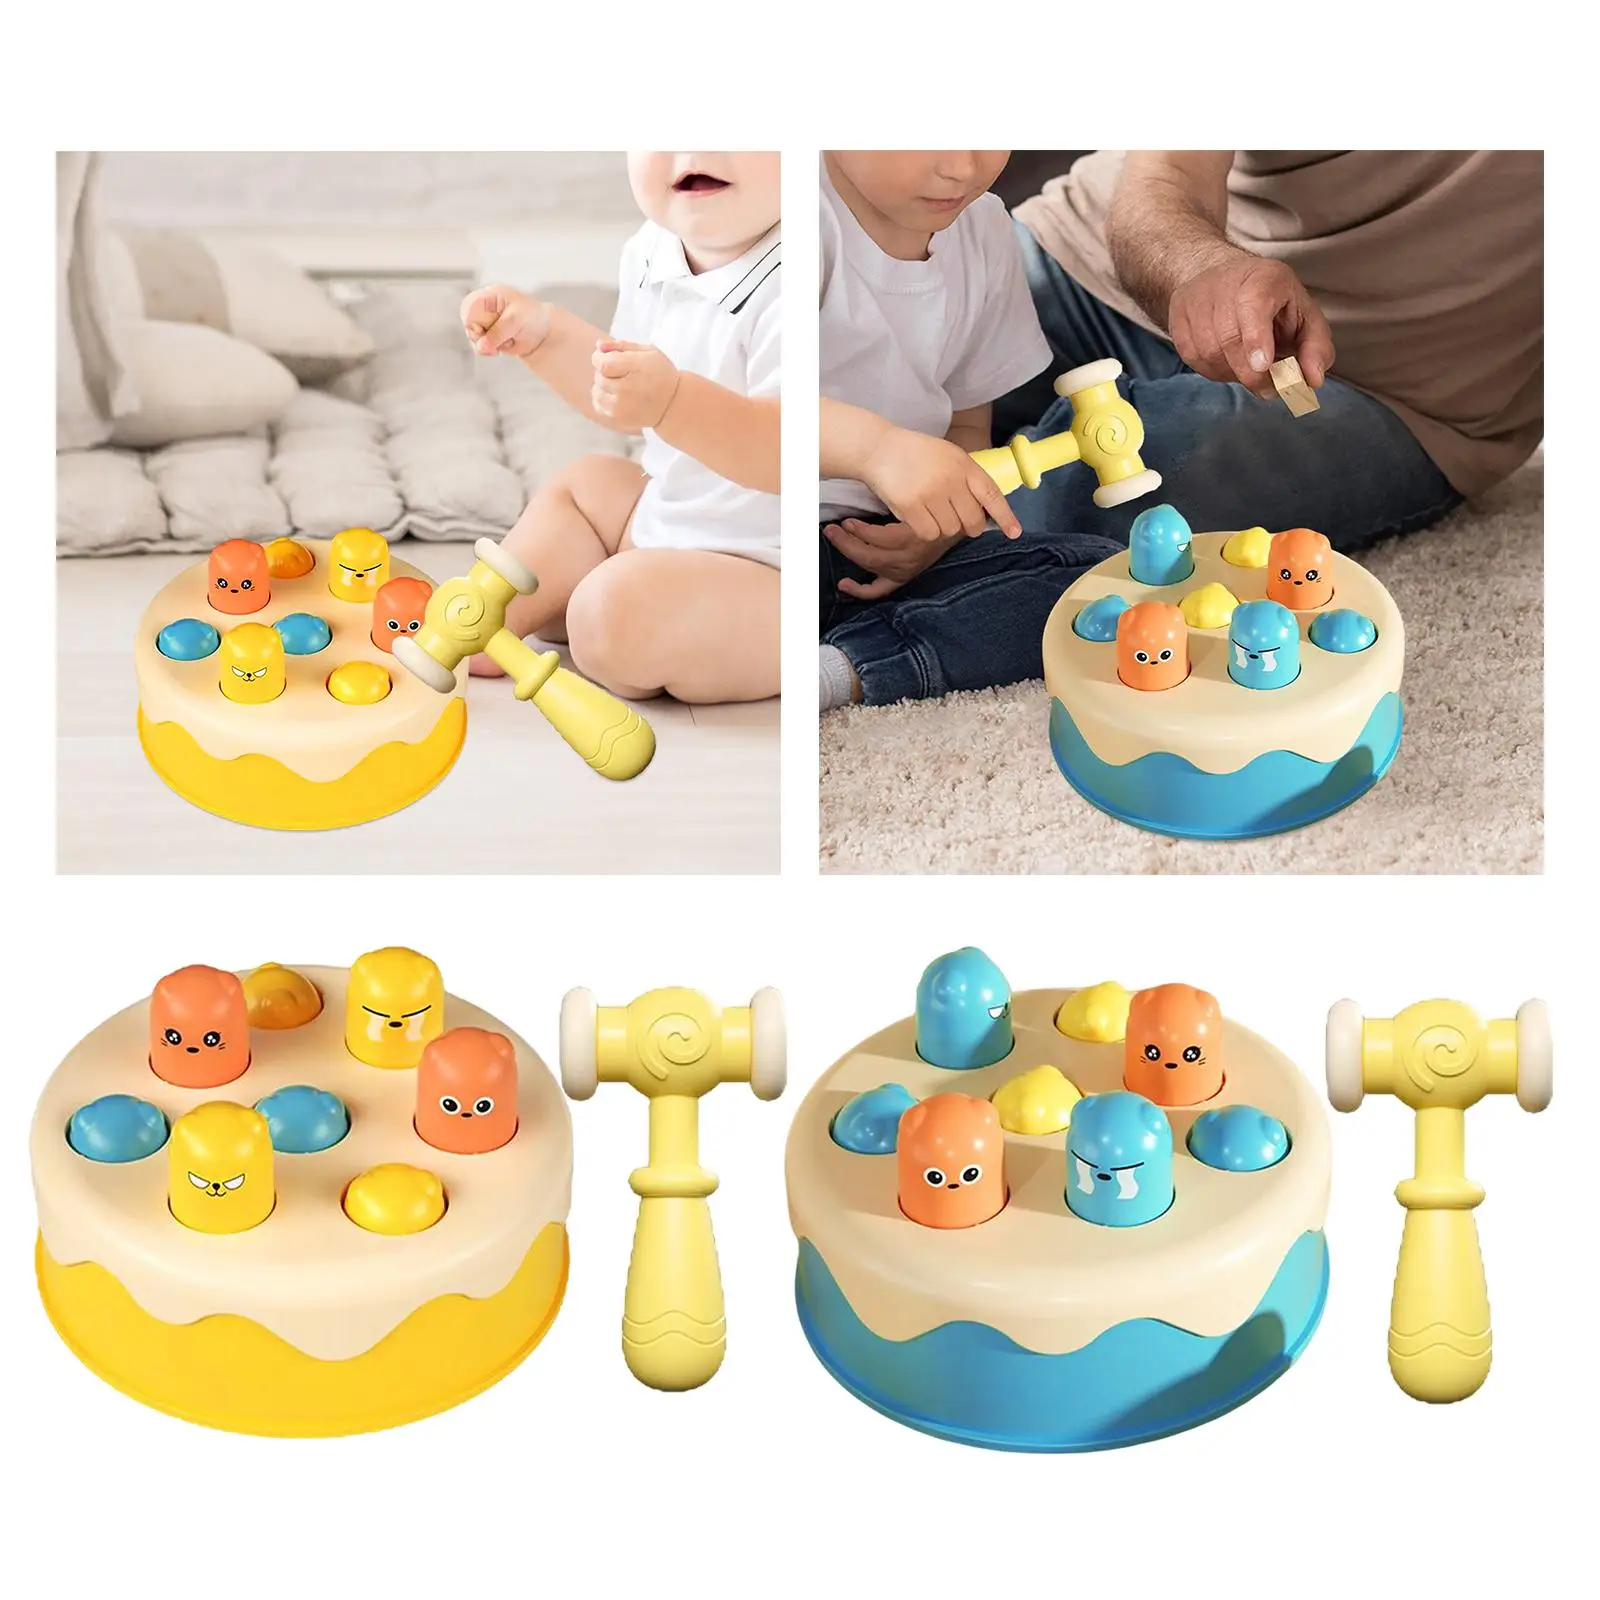 Whack A Hamster Game Hammering Pounding Toys Smooth Edges and Surfaces Fine Workmanship